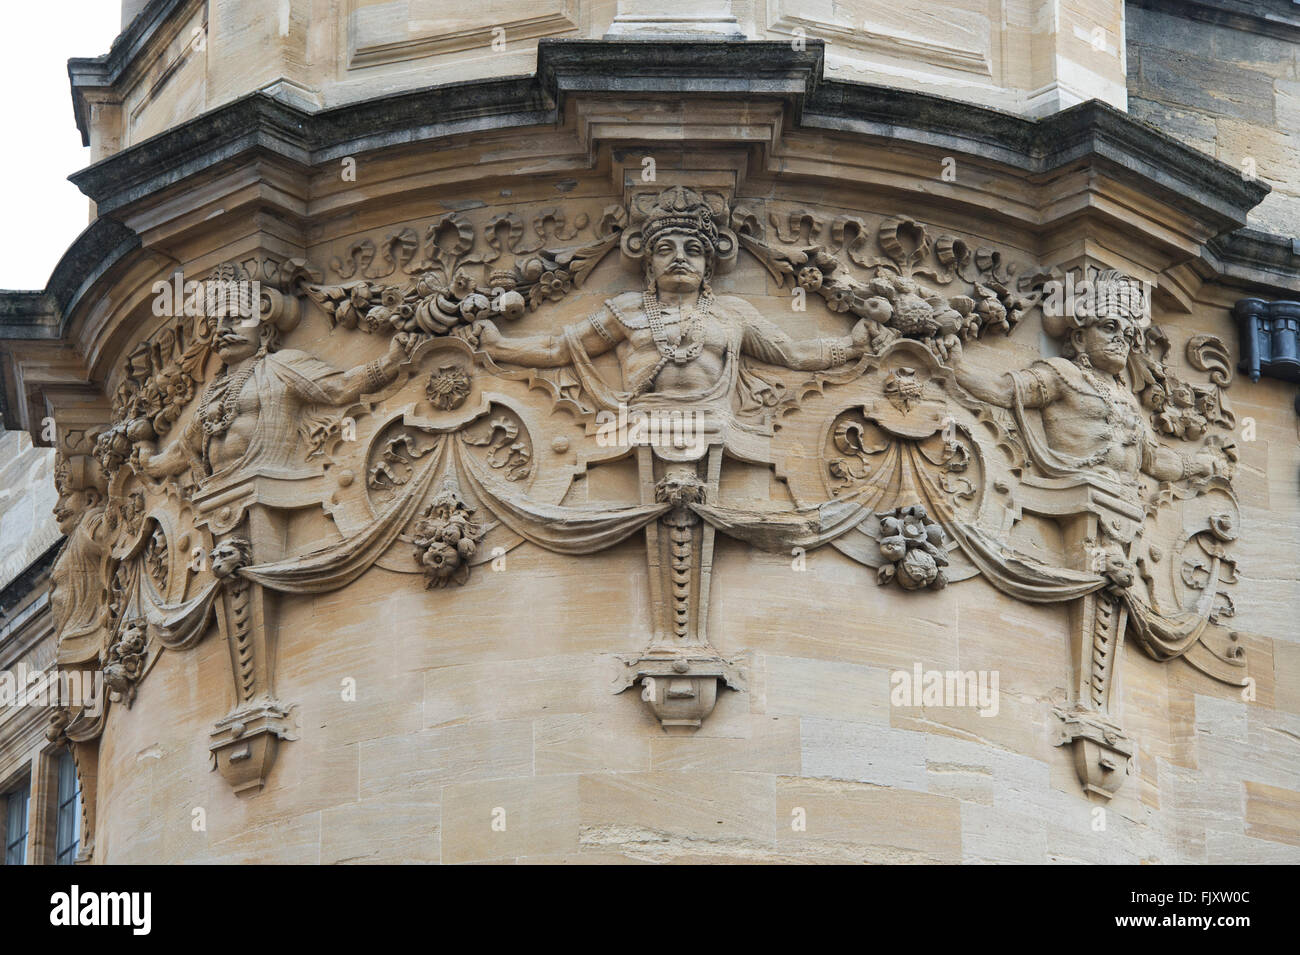 Stone Carvings on Old Indian Institute building / History Faculty Library, University of Oxford. England Stock Photo